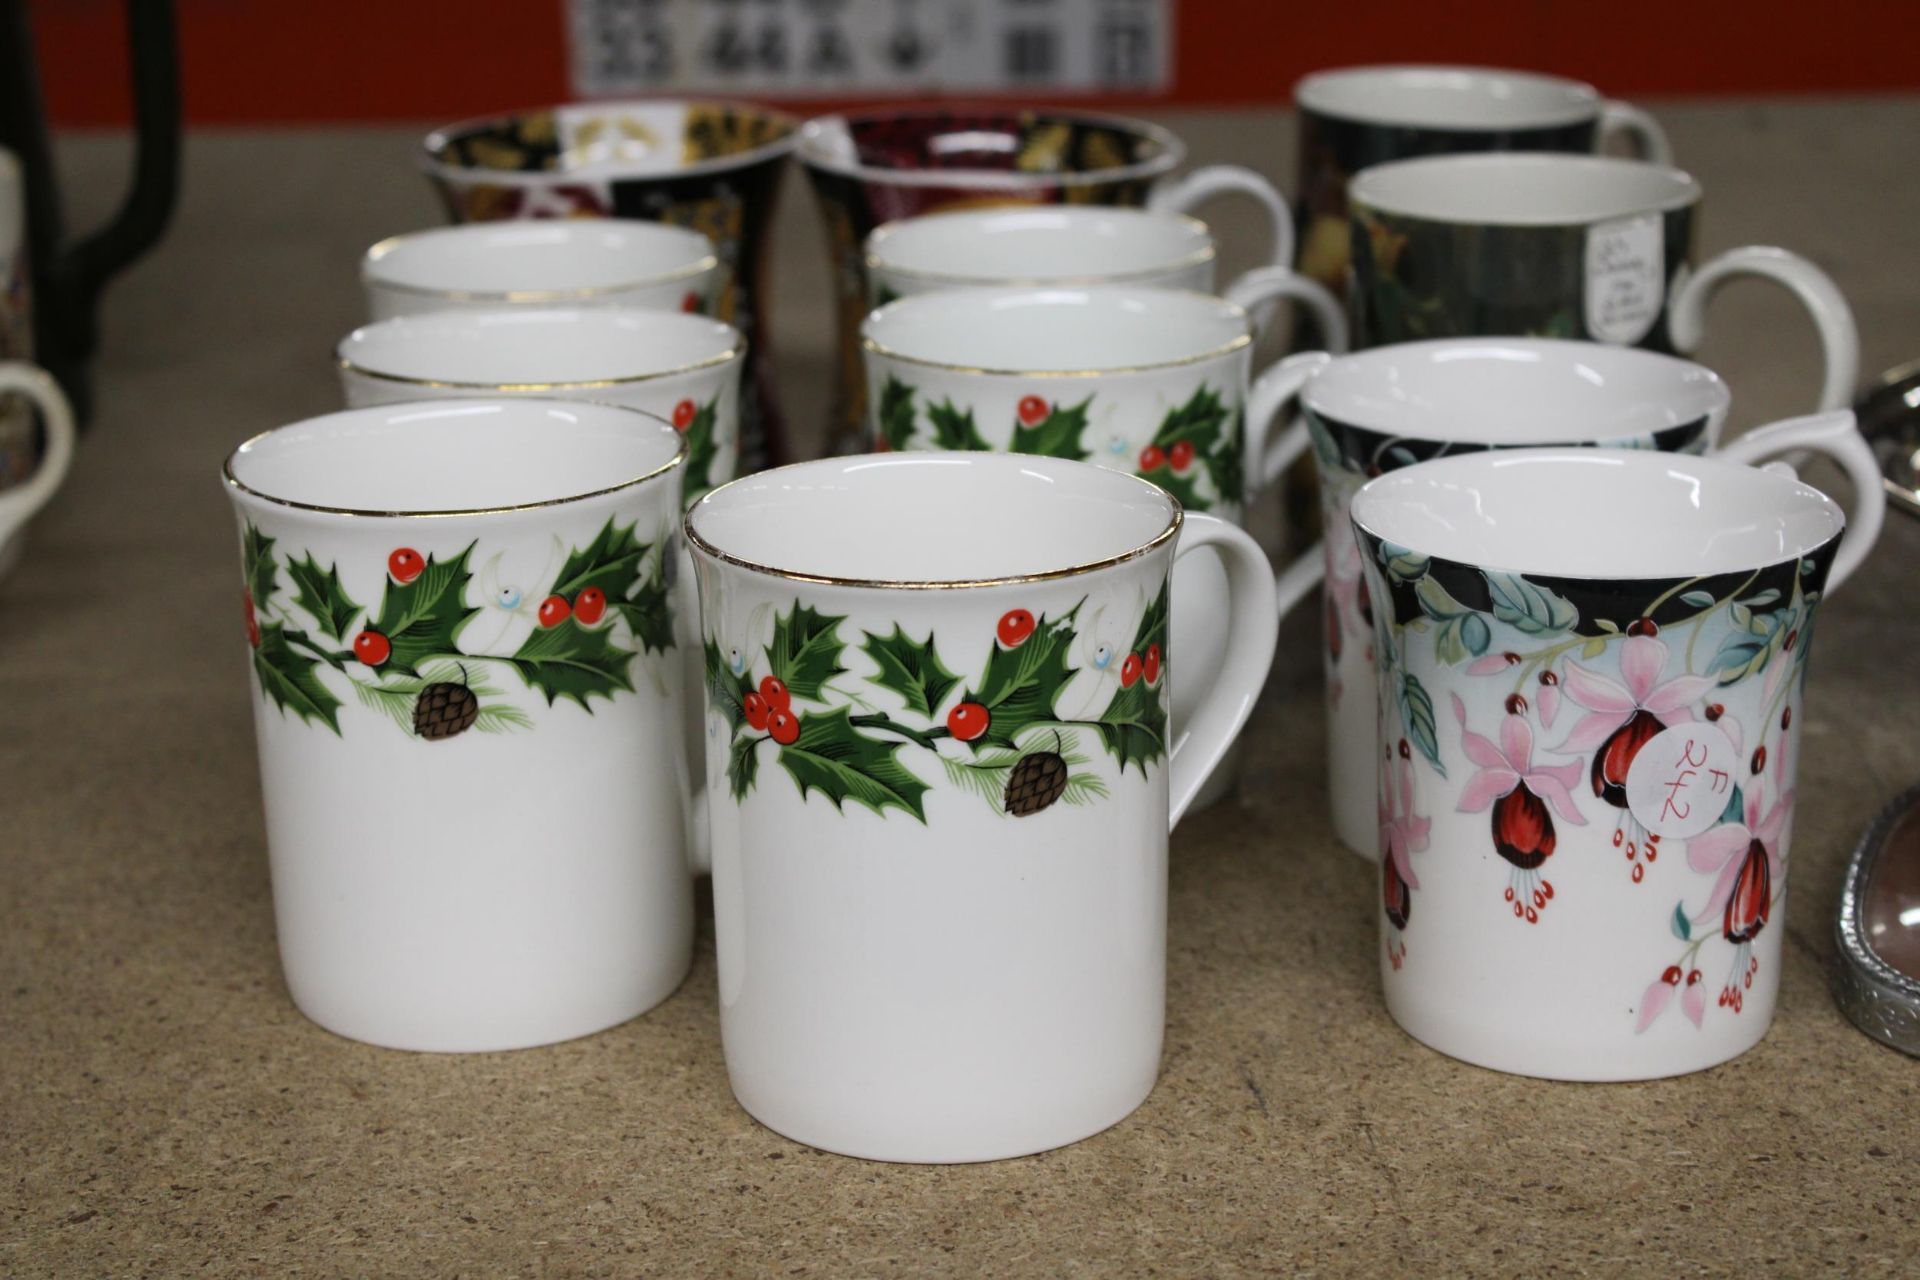 A QUANTITY OF AS NEW, CHINA MUGS TO INCLUDE ROYAL GRAFTON, DUNOON AND HUDSON MIDDLETON - 12 IN TOTAL